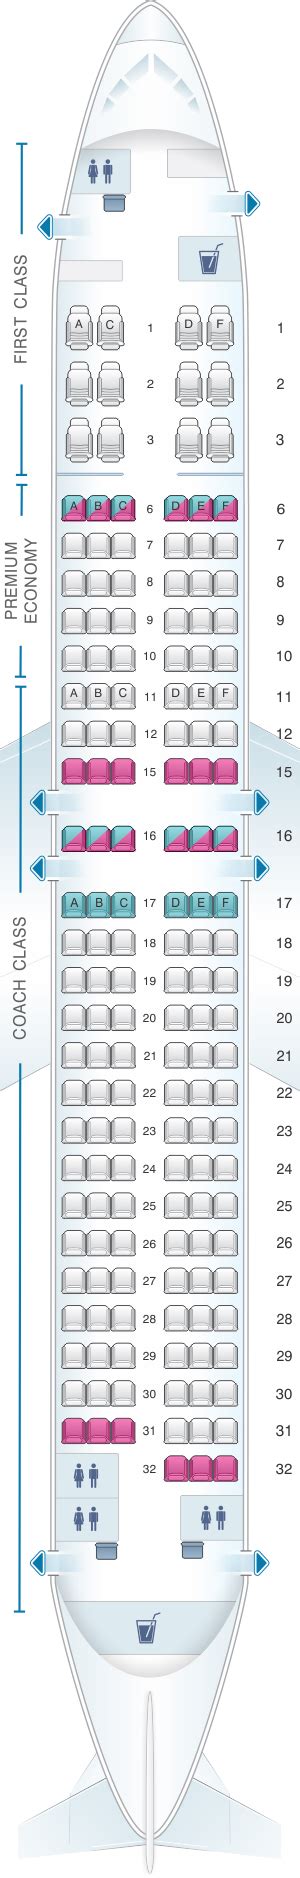 Alaska Airlines Seating Chart Awesome Home